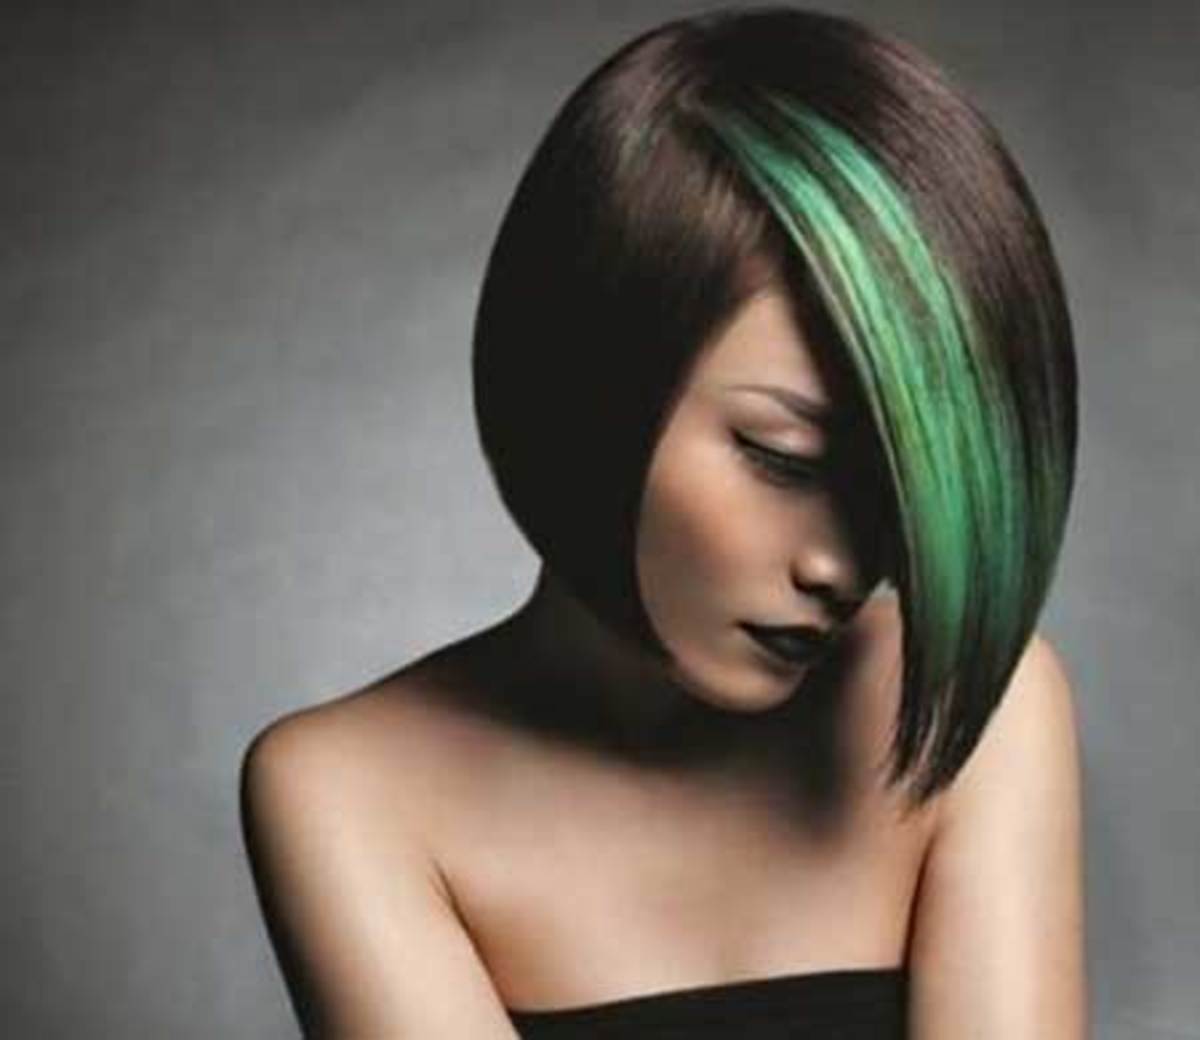 hair-diy-5-ideas-for-green-hair-and-how-to-do-them-at-home